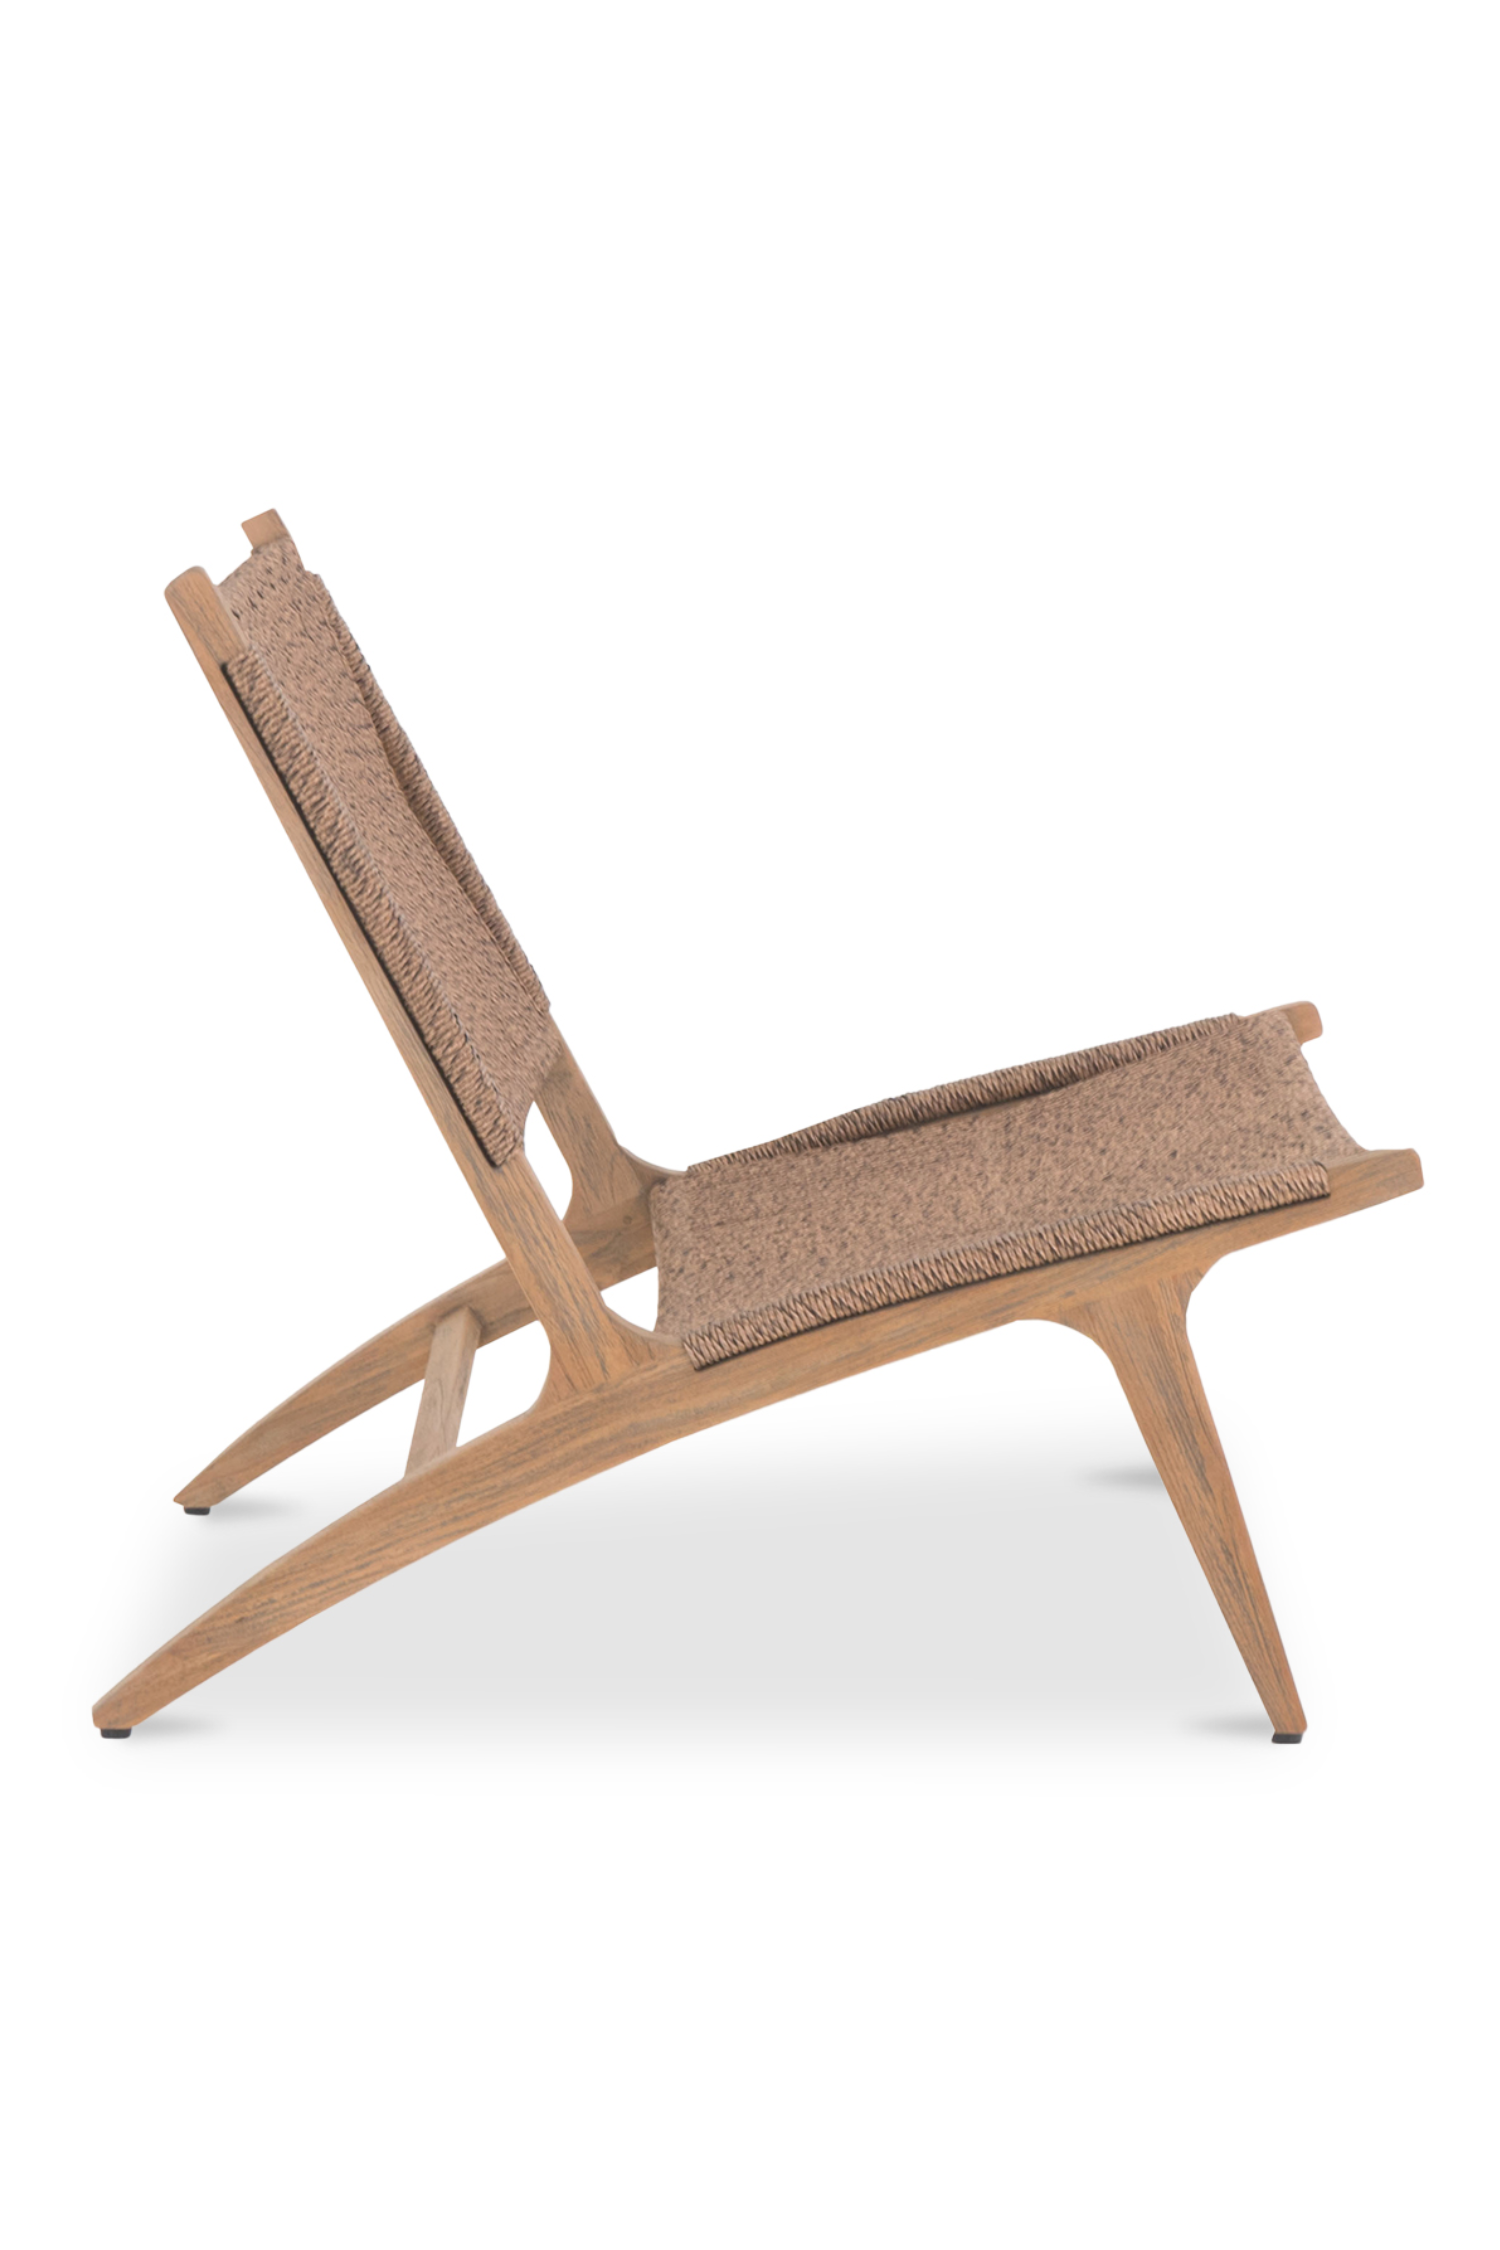 Key West Outdoor Lounge Chair